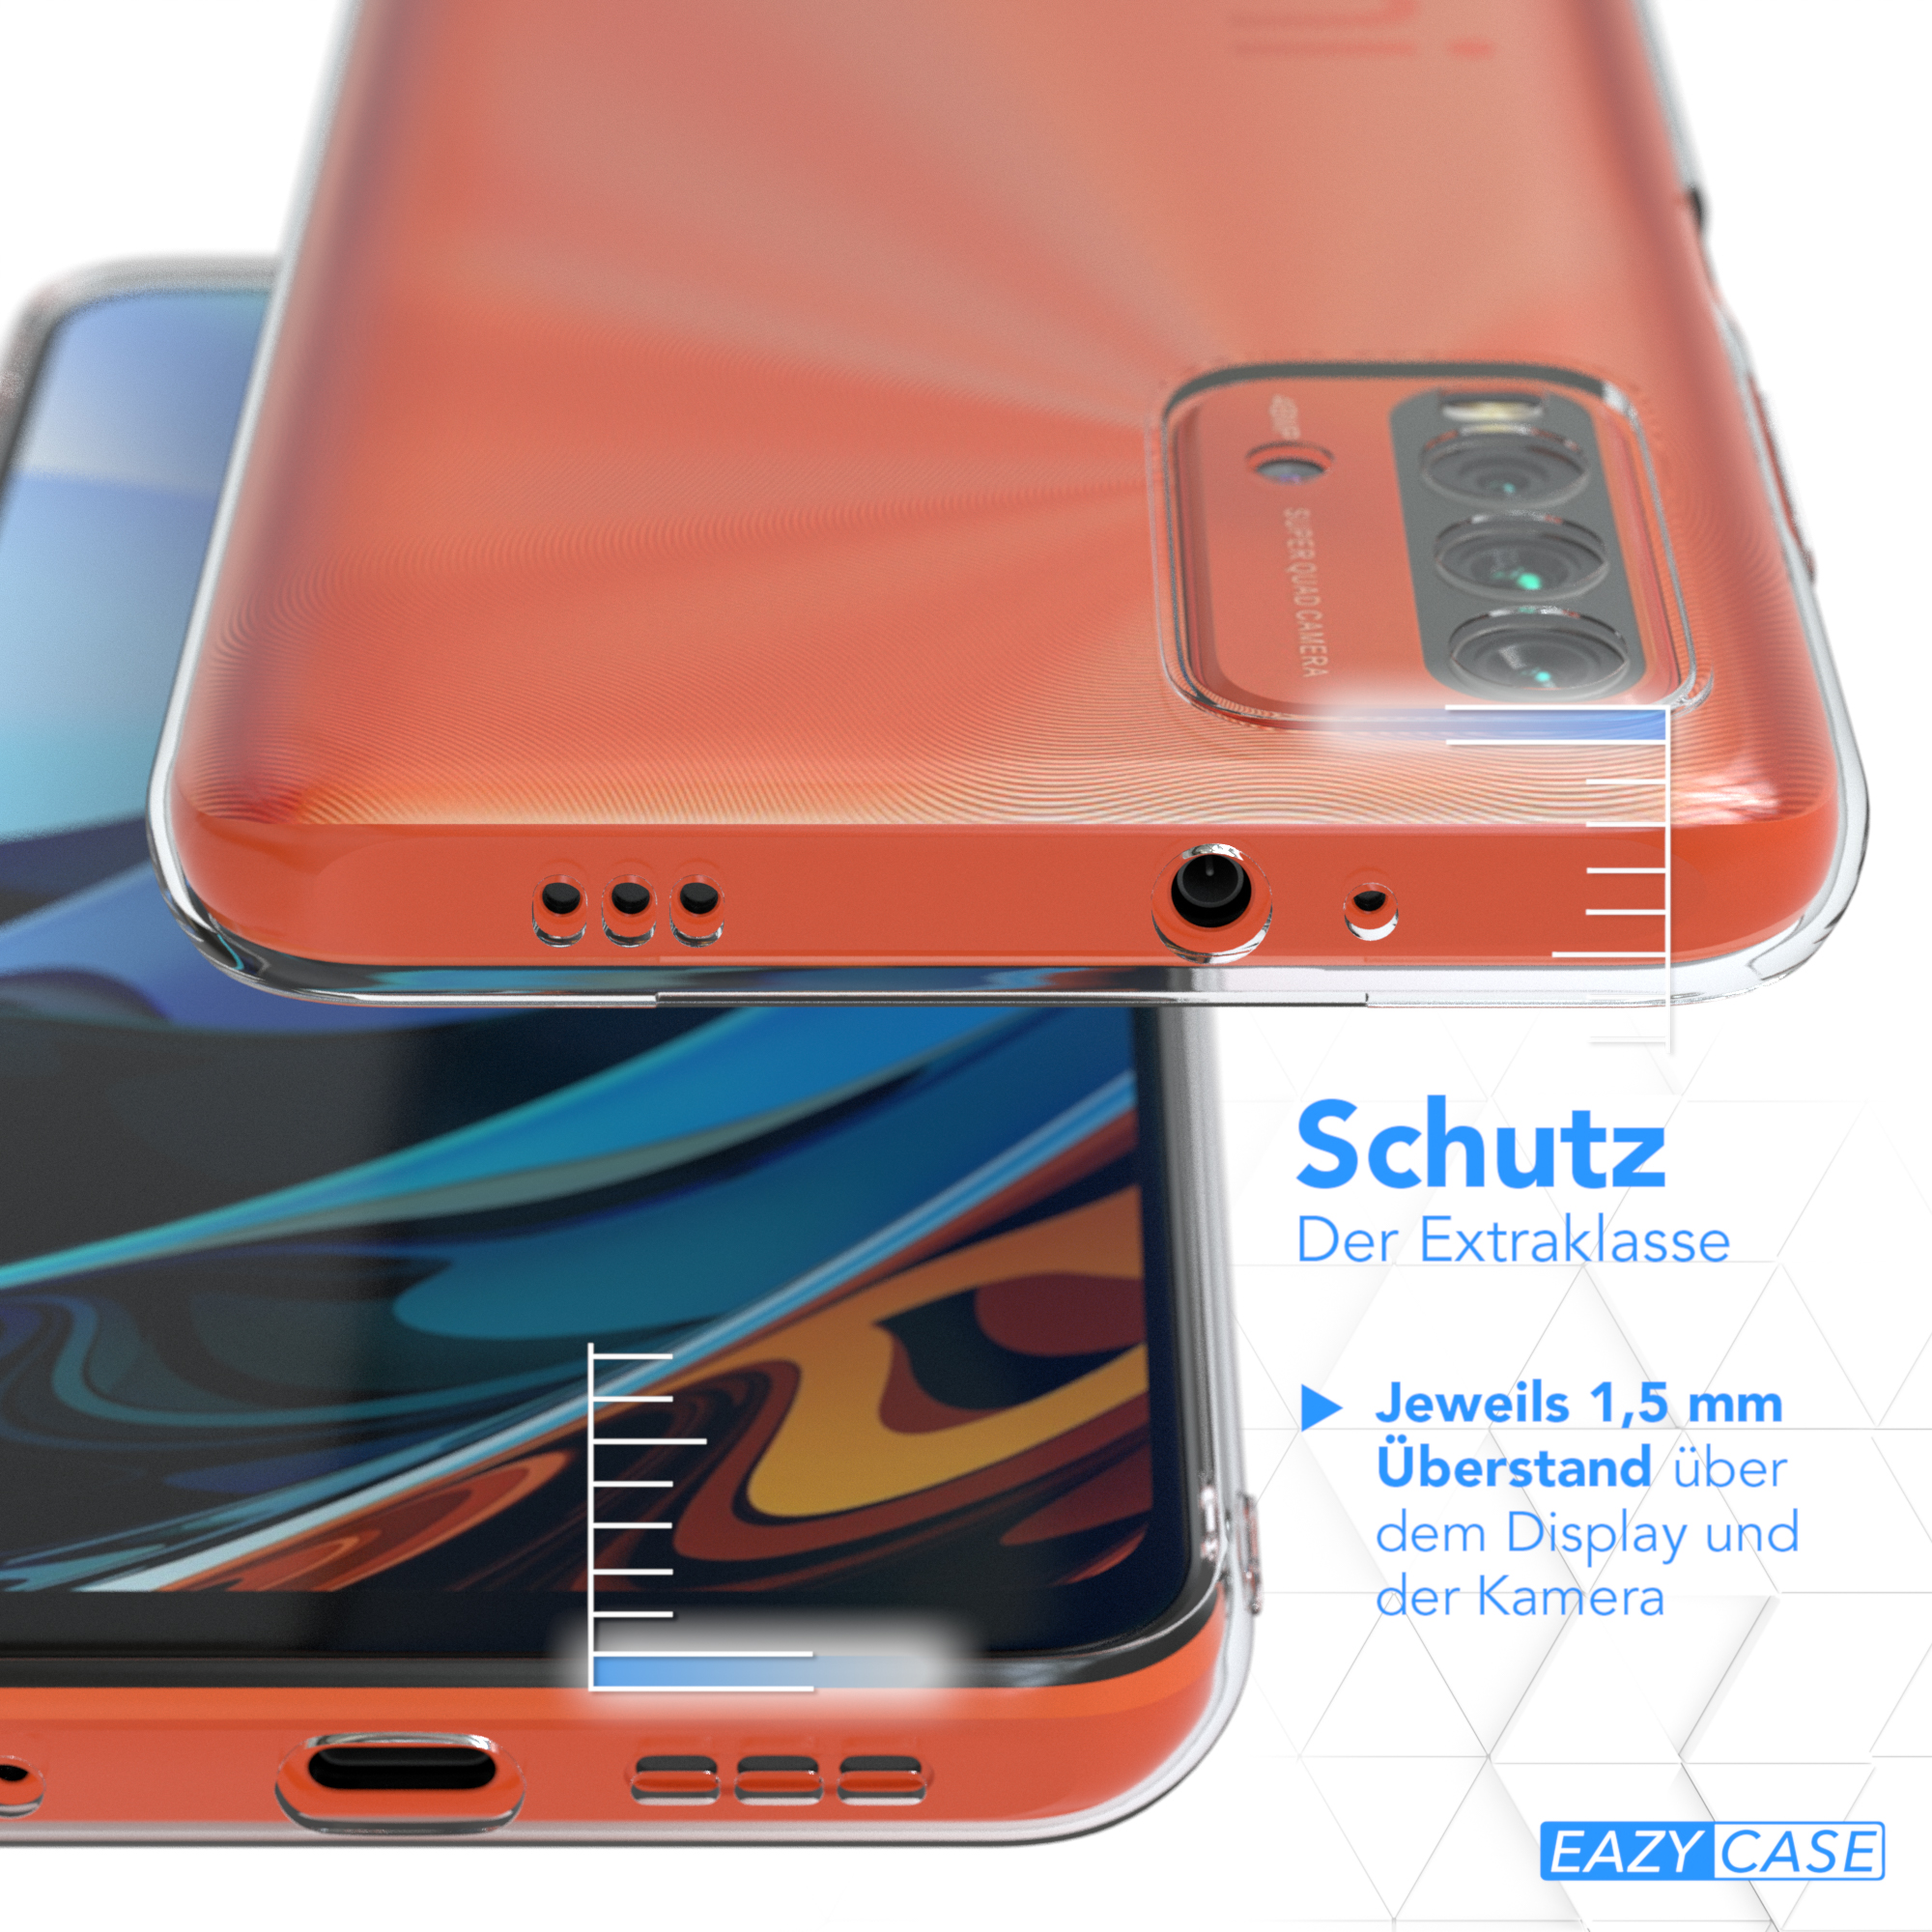 Durchsichtig Redmi 9T, Backcover, Xiaomi, CASE EAZY Slimcover Clear,